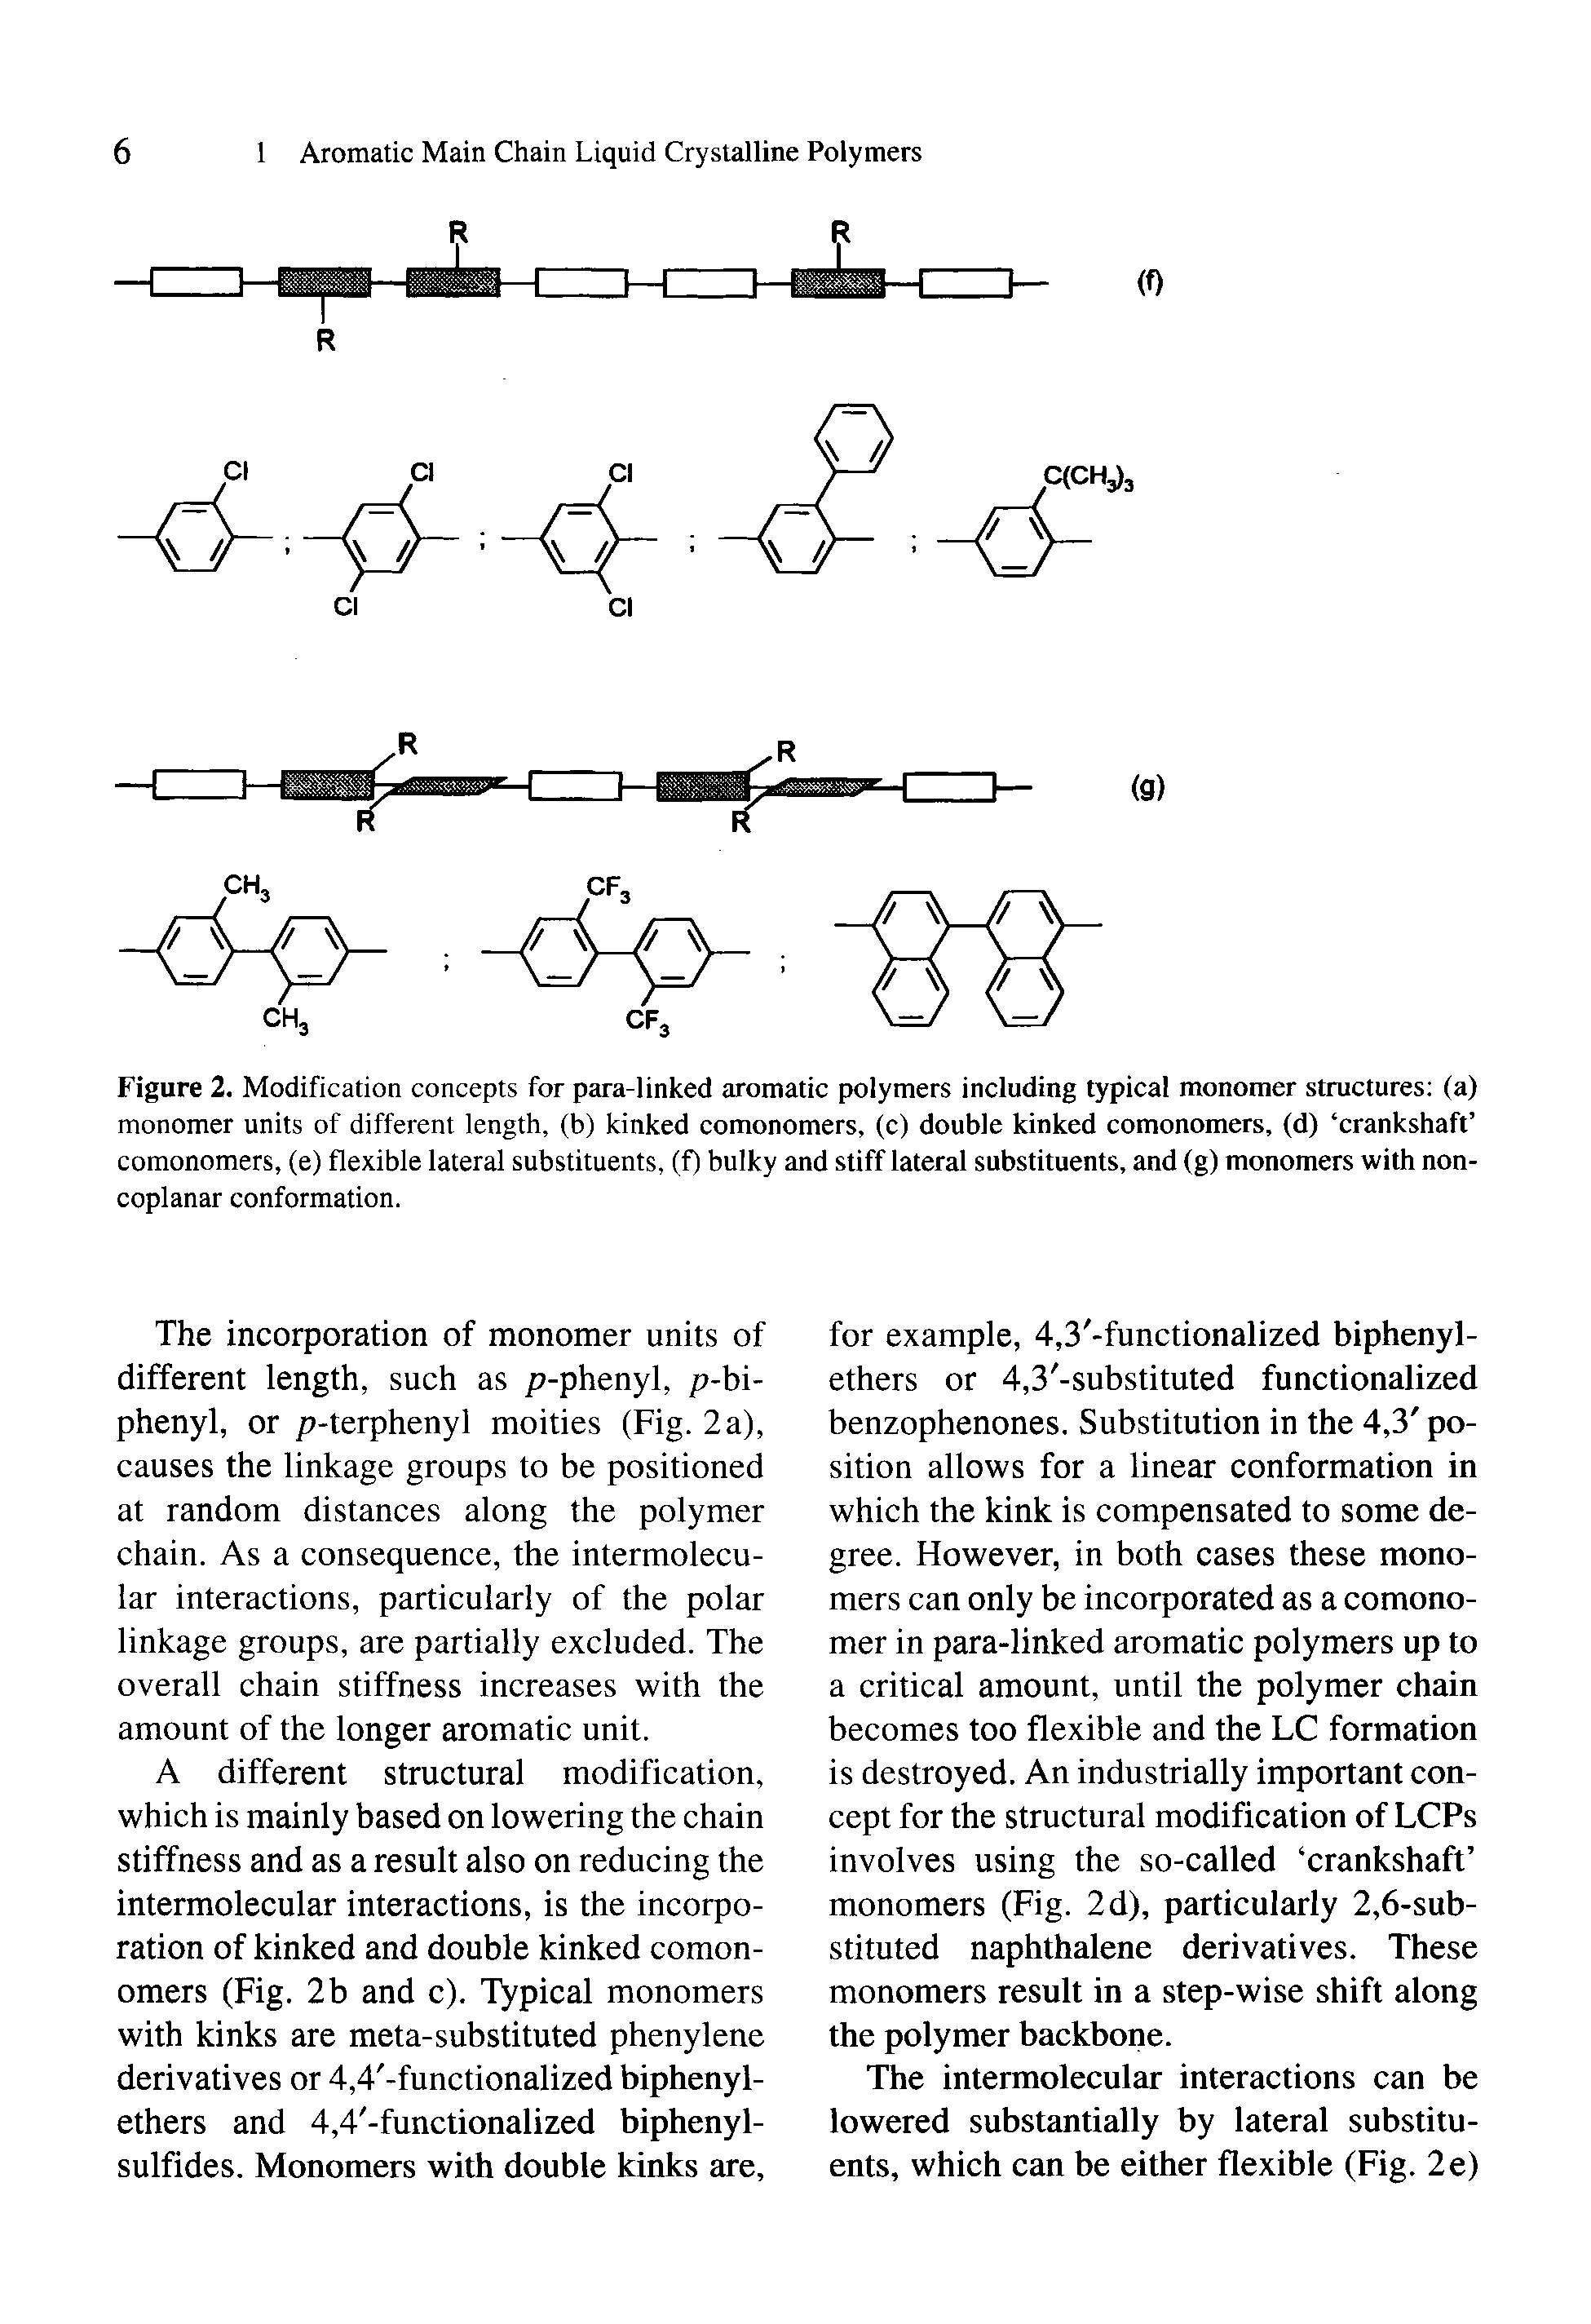 Figure 2. Modification concepts for para-linked aromatic polymers including typical monomer structures (a) monomer units of different length, (b) kinked comonomers, (c) double kinked comonomers, (d) crankshaft comonomers, (e) flexible lateral substituents, (f) bulky and stiff lateral substituents, and (g) monomers with non-coplanar conformation.